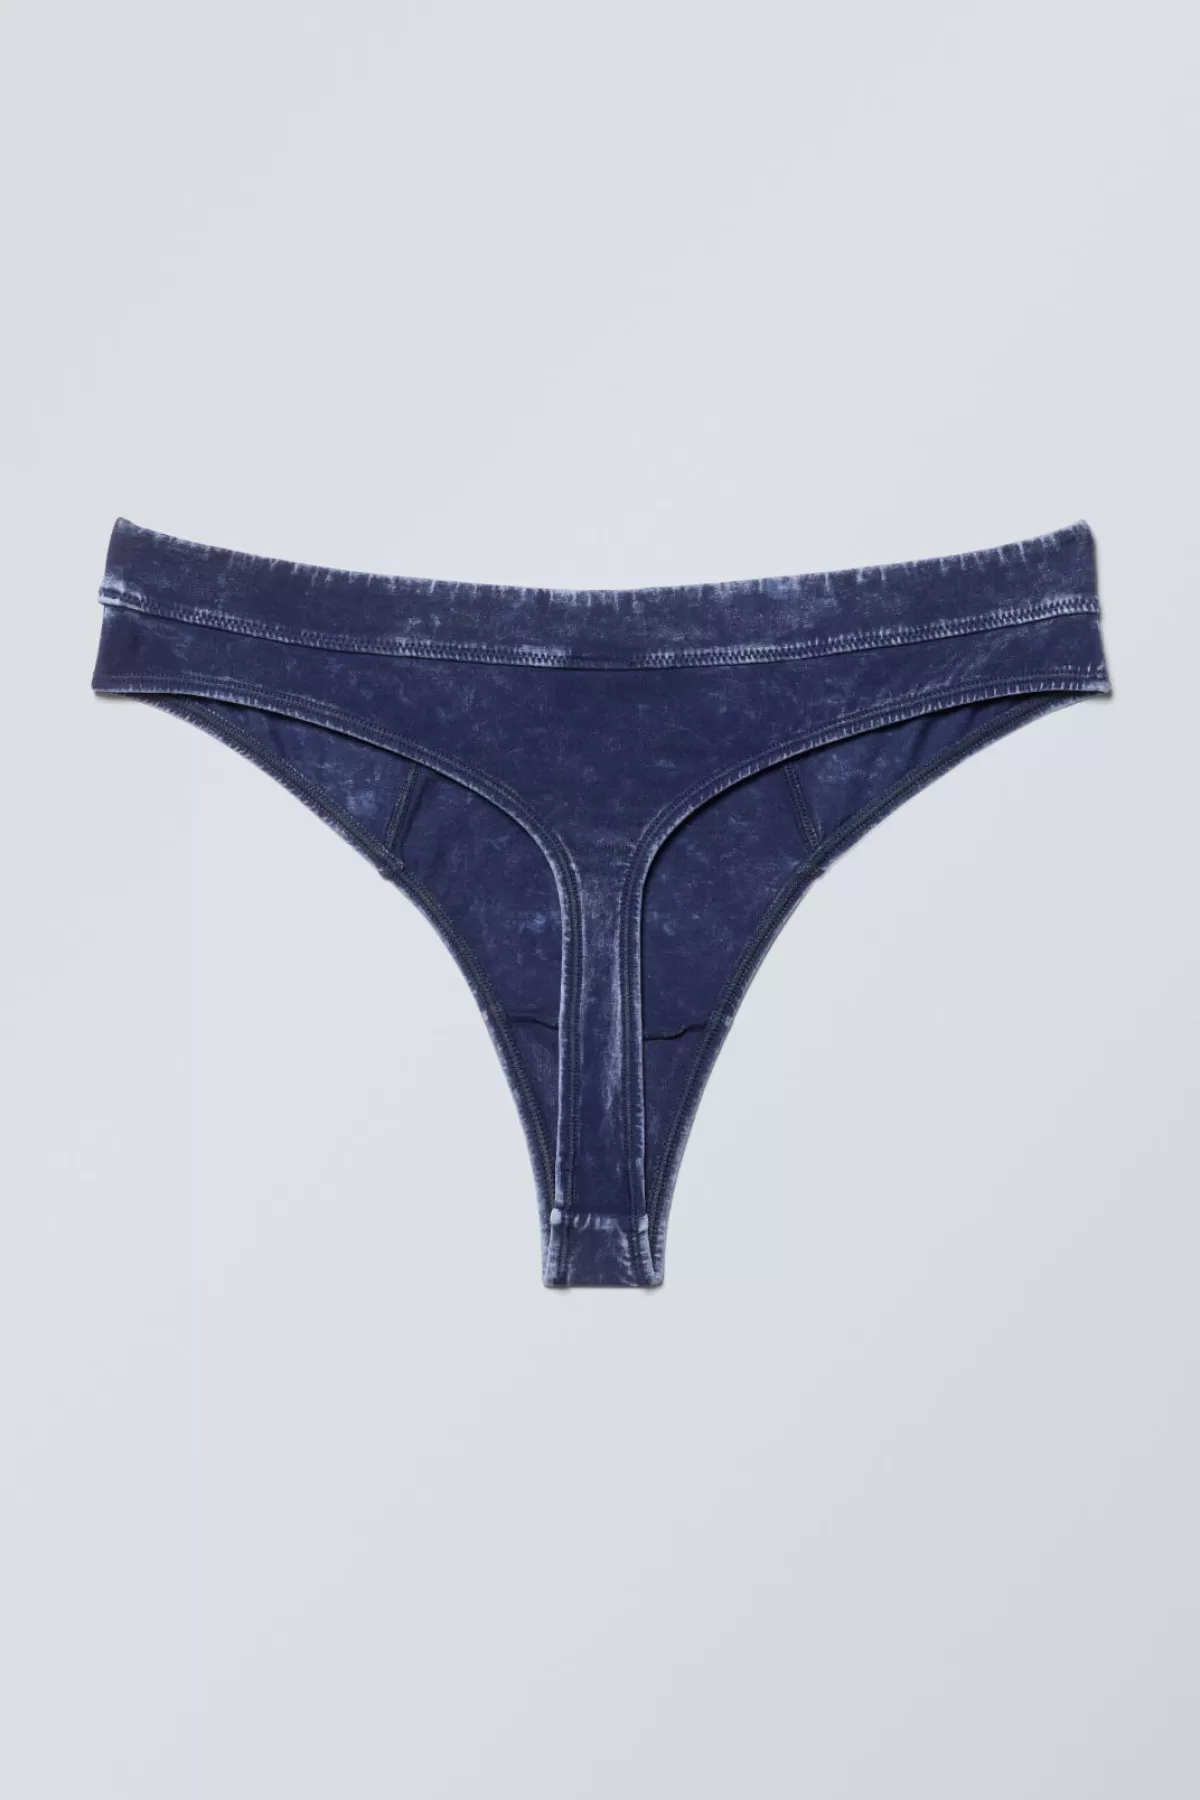 Weekday Miley Washed Cotton Thong Bleach Washed Blue Hot